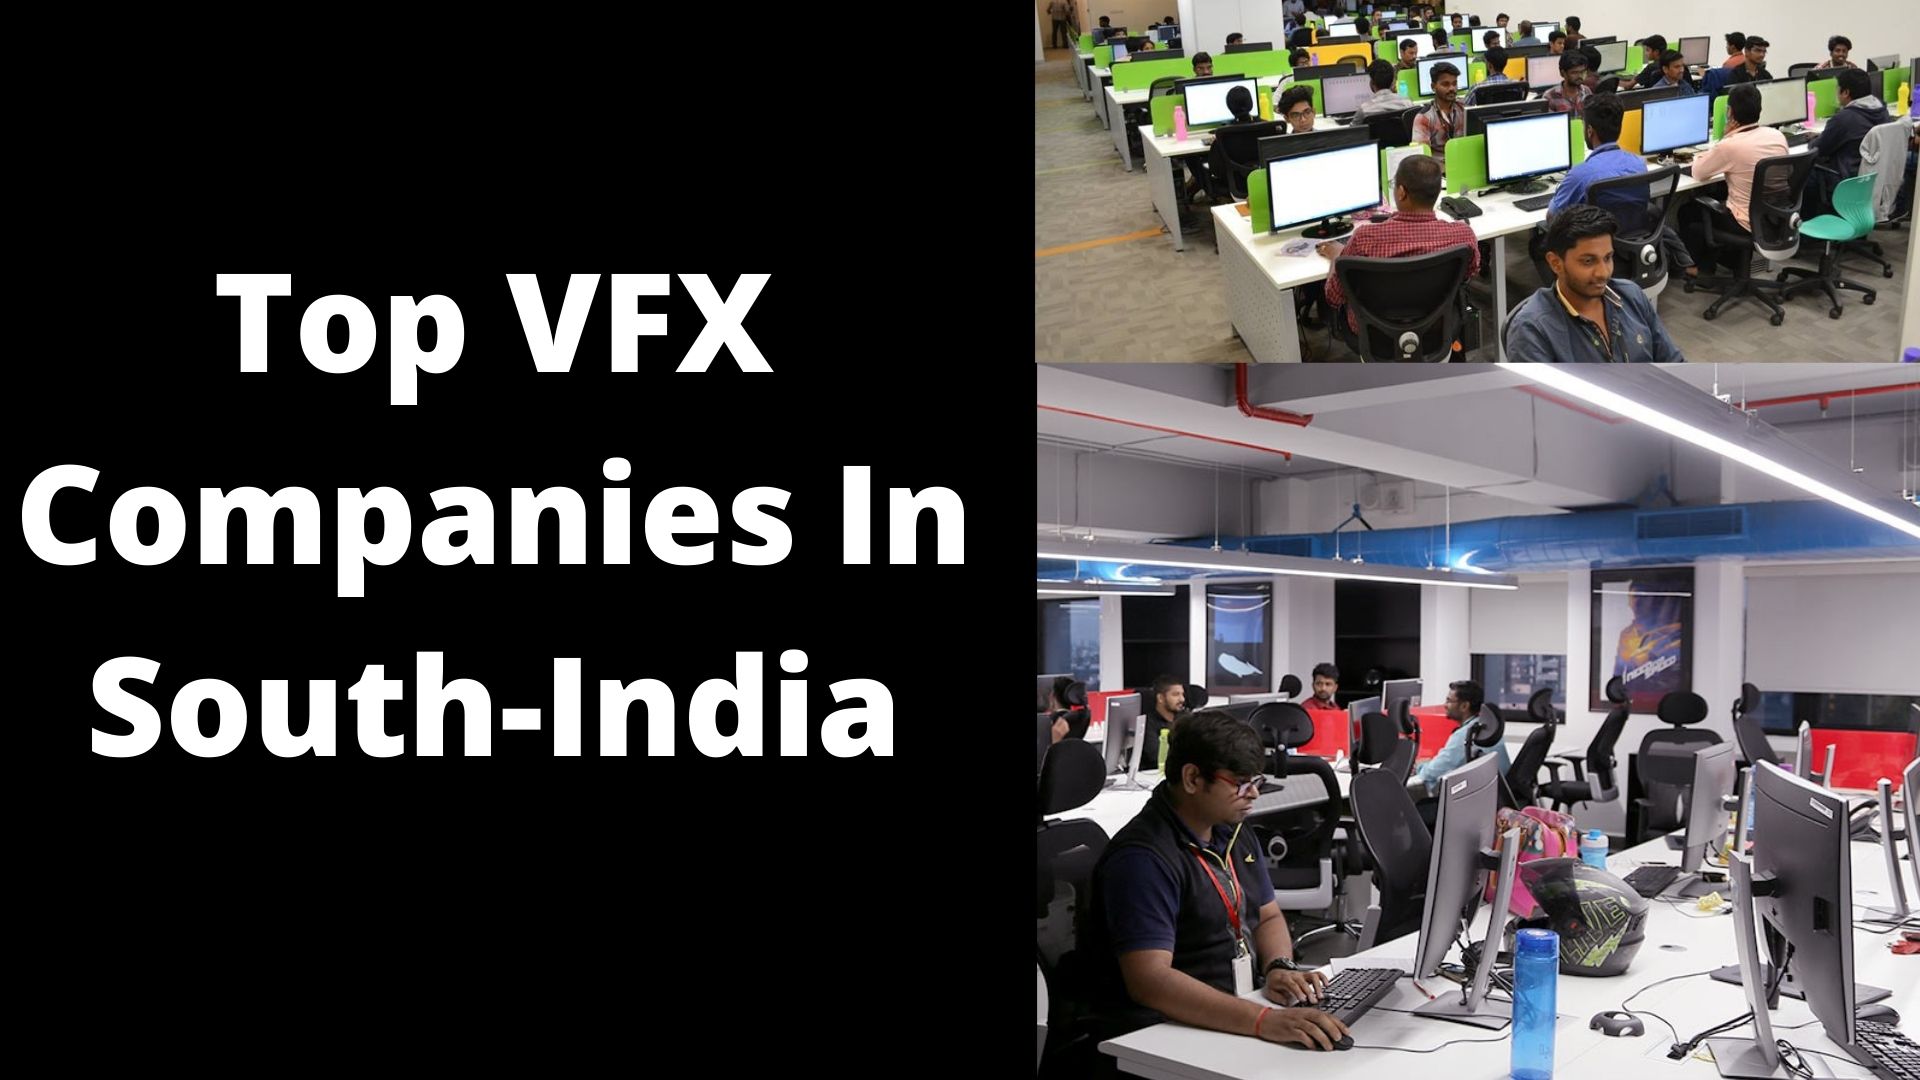 Top VFX Companies In South-India